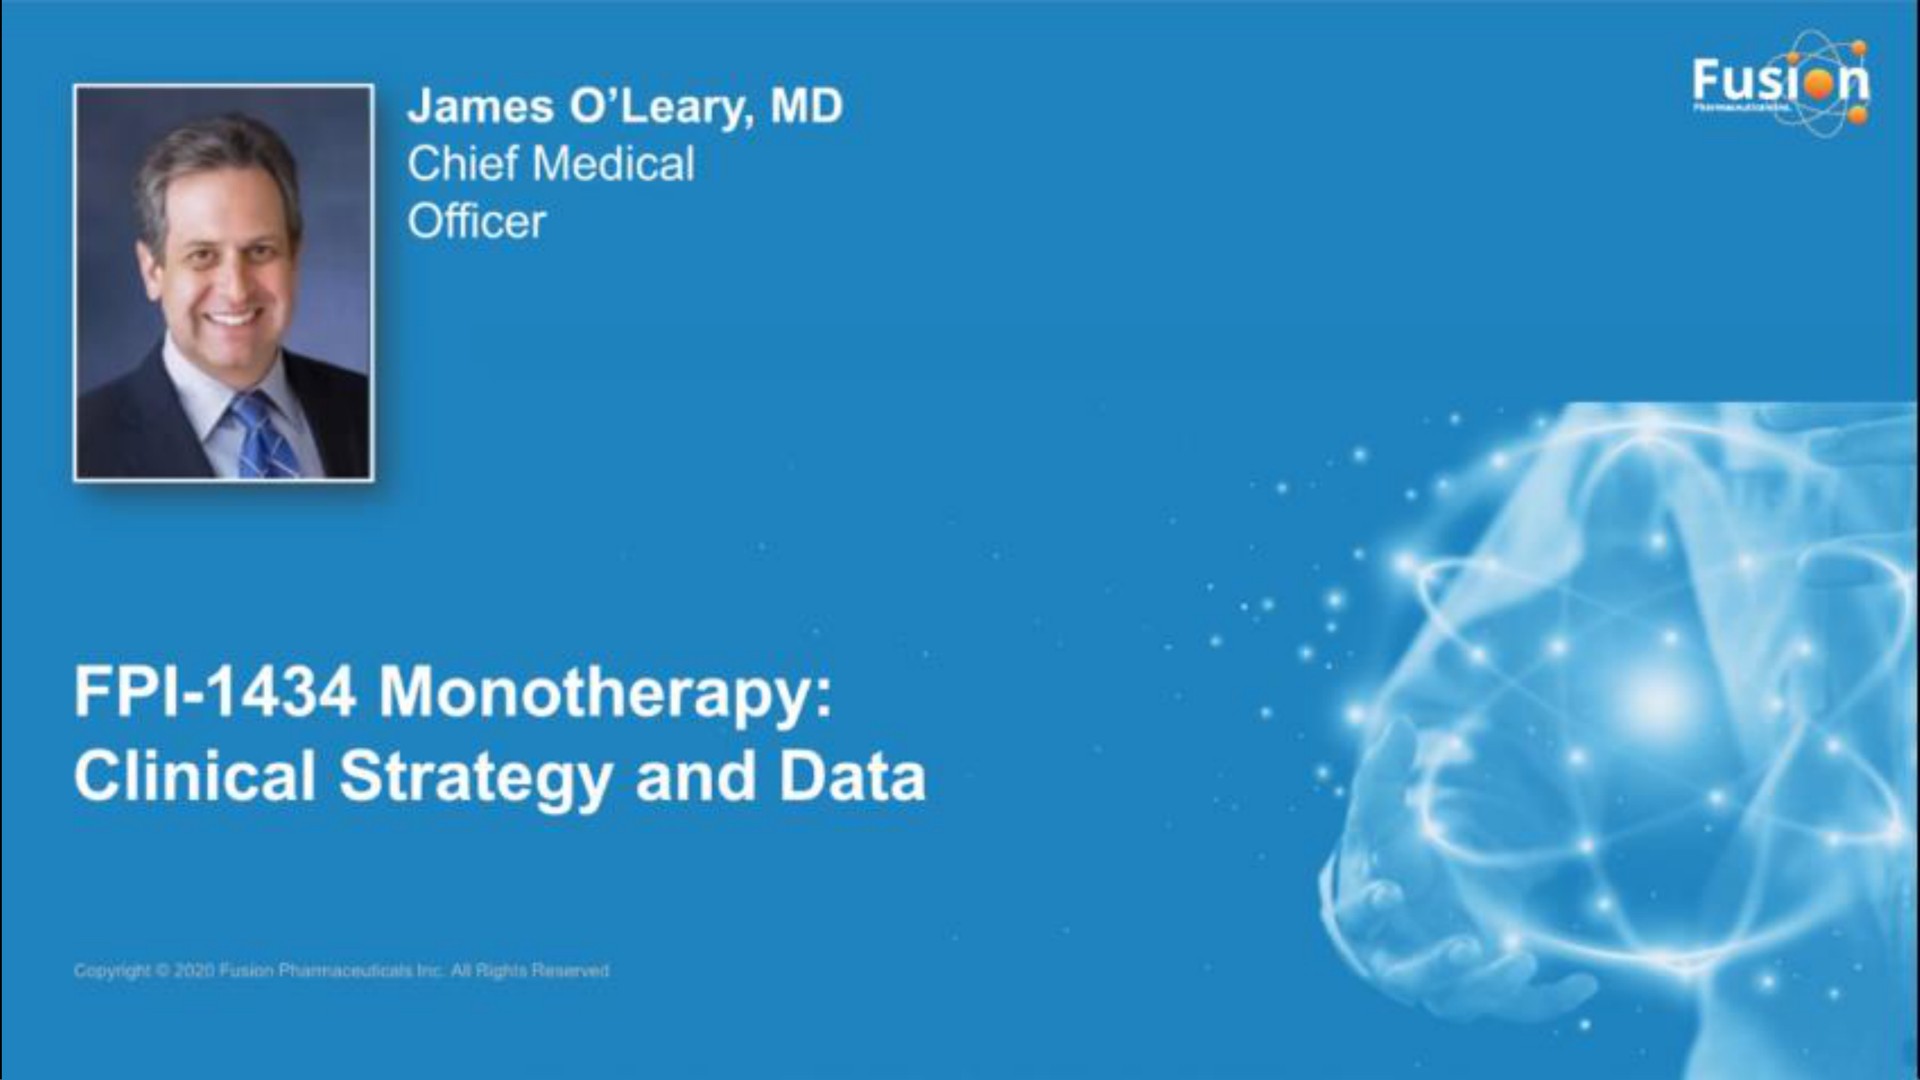 james chief medical officer clinical strategy and data | Fusion Pharmaceuticals